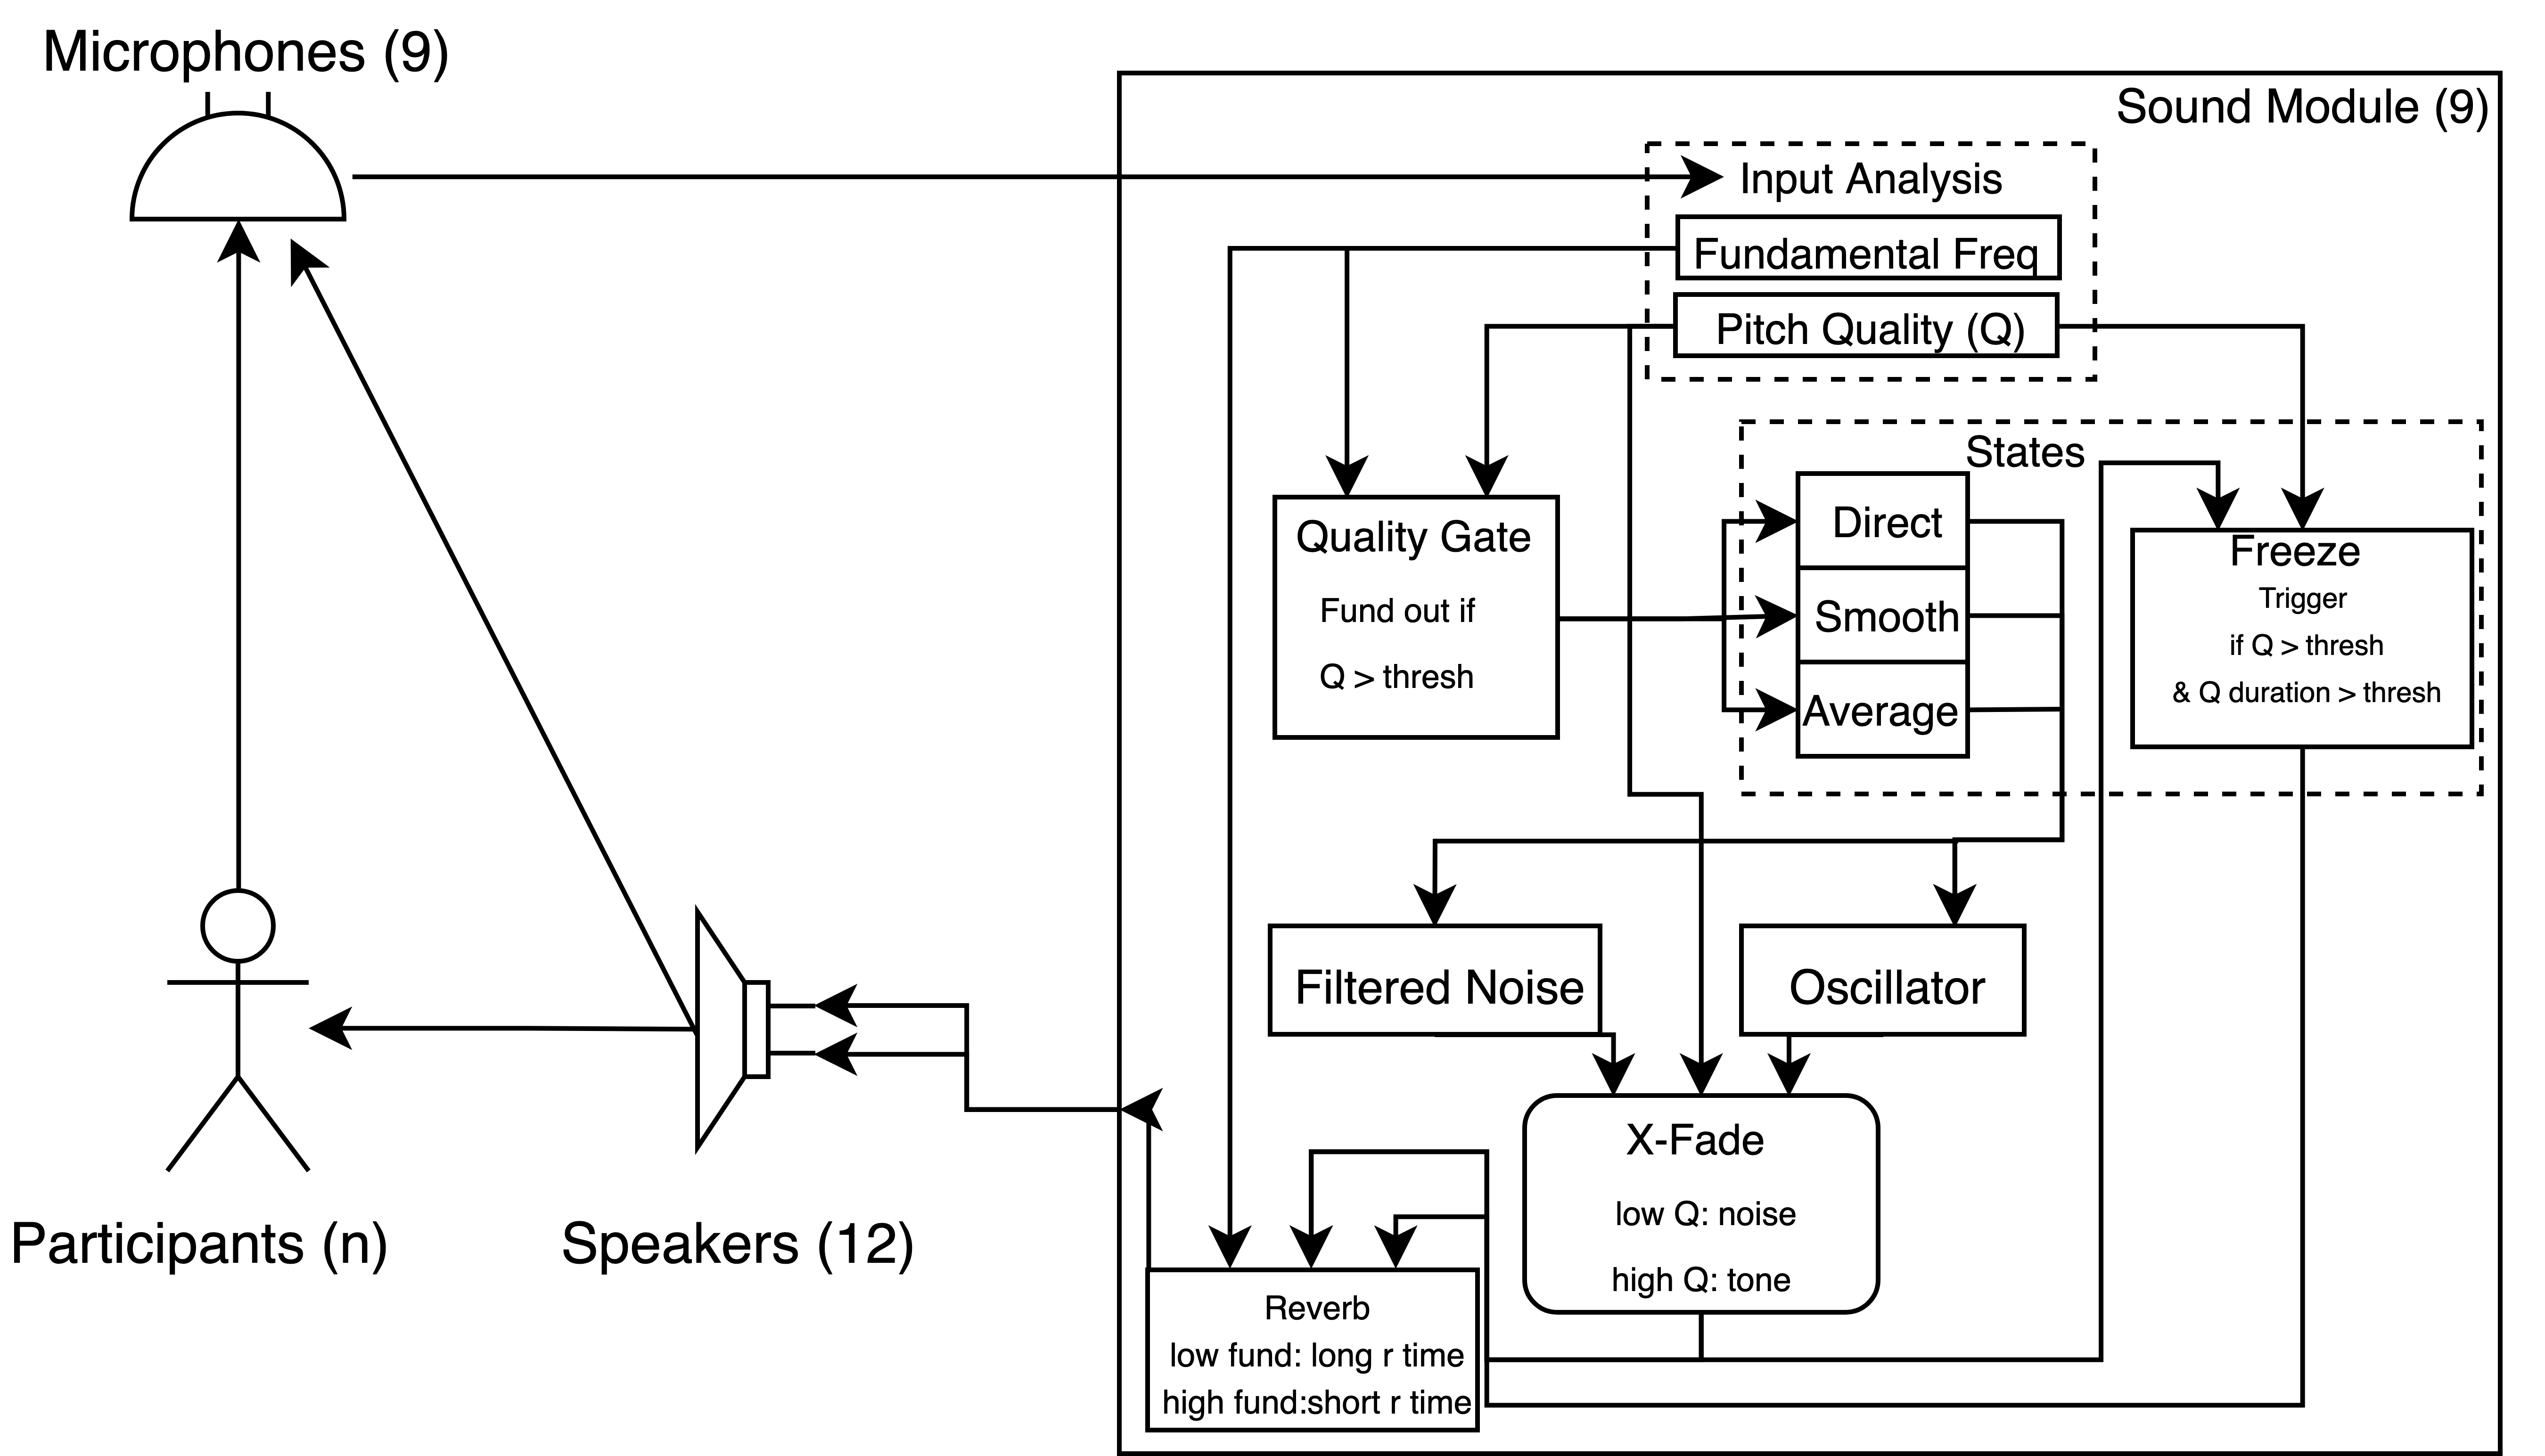 System logic and signal flow diagram